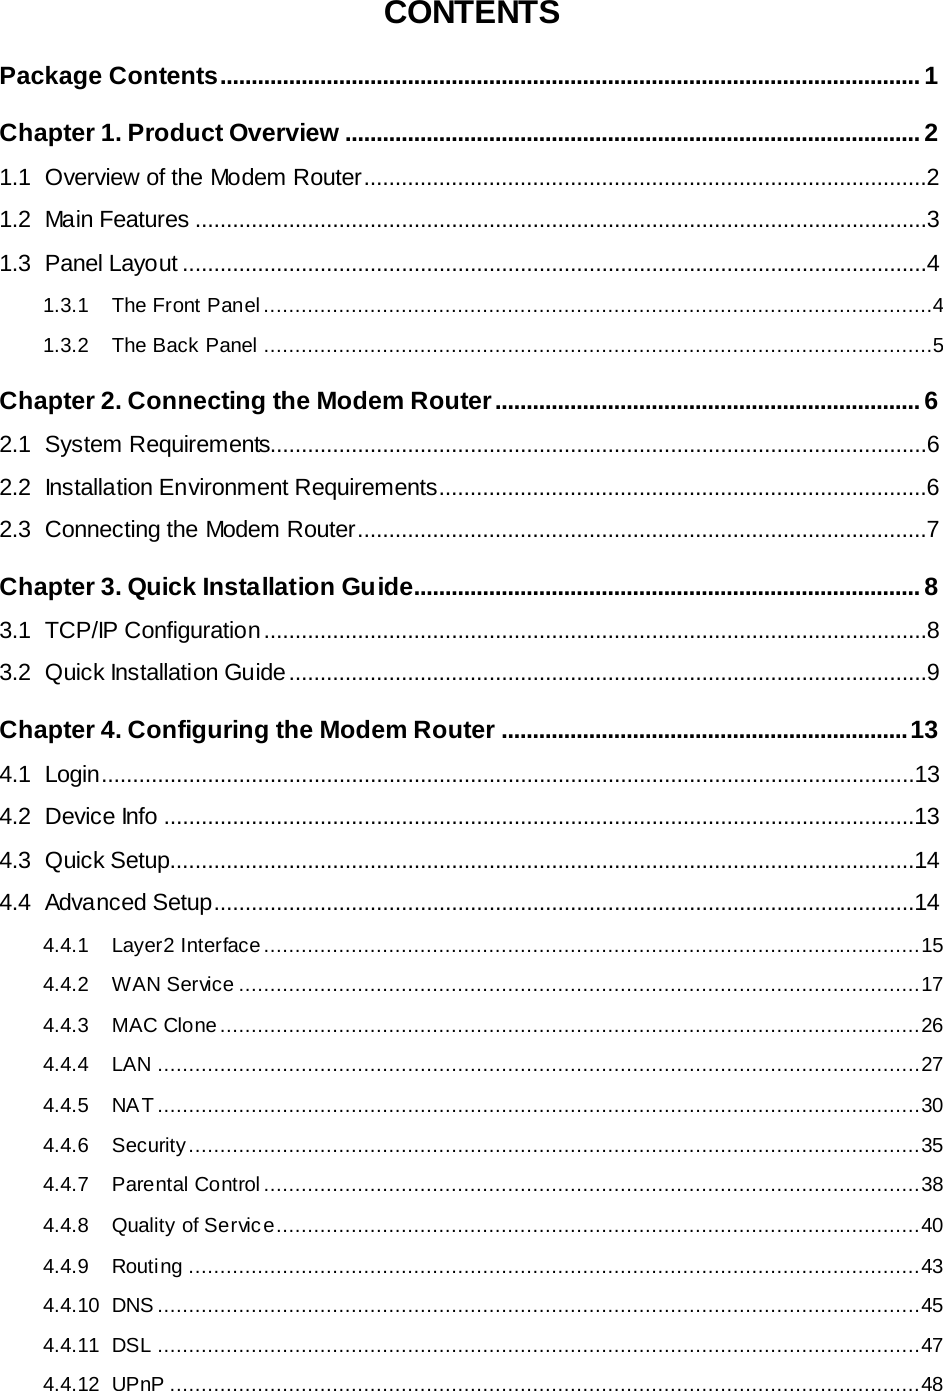   CONTENTS Package Contents ................................................................................................................ 1 Chapter 1. Product Overview ............................................................................................ 2 1.1 Overview of the Modem Router ..........................................................................................2 1.2 Main Features .....................................................................................................................3 1.3 Panel Layout .......................................................................................................................4 1.3.1 The Front Panel ...........................................................................................................4 1.3.2 The Back Panel ...........................................................................................................5 Chapter 2. Connecting the Modem Router .................................................................... 6 2.1 System Requirements.........................................................................................................6 2.2 Installation Environment Requirements..............................................................................6 2.3 Connecting the Modem Router...........................................................................................7 Chapter 3. Quick Installation Guide................................................................................. 8 3.1 TCP/IP Configuration ..........................................................................................................8 3.2 Quick Installation Guide ......................................................................................................9 Chapter 4. Configuring the Modem Router ................................................................. 13 4.1 Login..................................................................................................................................13 4.2 Device Info ........................................................................................................................13 4.3 Quick Setup.......................................................................................................................14 4.4 Advanced Setup................................................................................................................14 4.4.1 Layer2 Interface ......................................................................................................... 15 4.4.2 WAN Service ............................................................................................................. 17 4.4.3 MAC Clone ................................................................................................................ 26 4.4.4 LAN .......................................................................................................................... 27 4.4.5 NAT .......................................................................................................................... 30 4.4.6 Security ..................................................................................................................... 35 4.4.7 Parental Control ......................................................................................................... 38 4.4.8 Quality of Service....................................................................................................... 40 4.4.9 Routing ..................................................................................................................... 43 4.4.10 DNS  .......................................................................................................................... 45 4.4.11 DSL .......................................................................................................................... 47 4.4.12 UPnP ........................................................................................................................ 48 